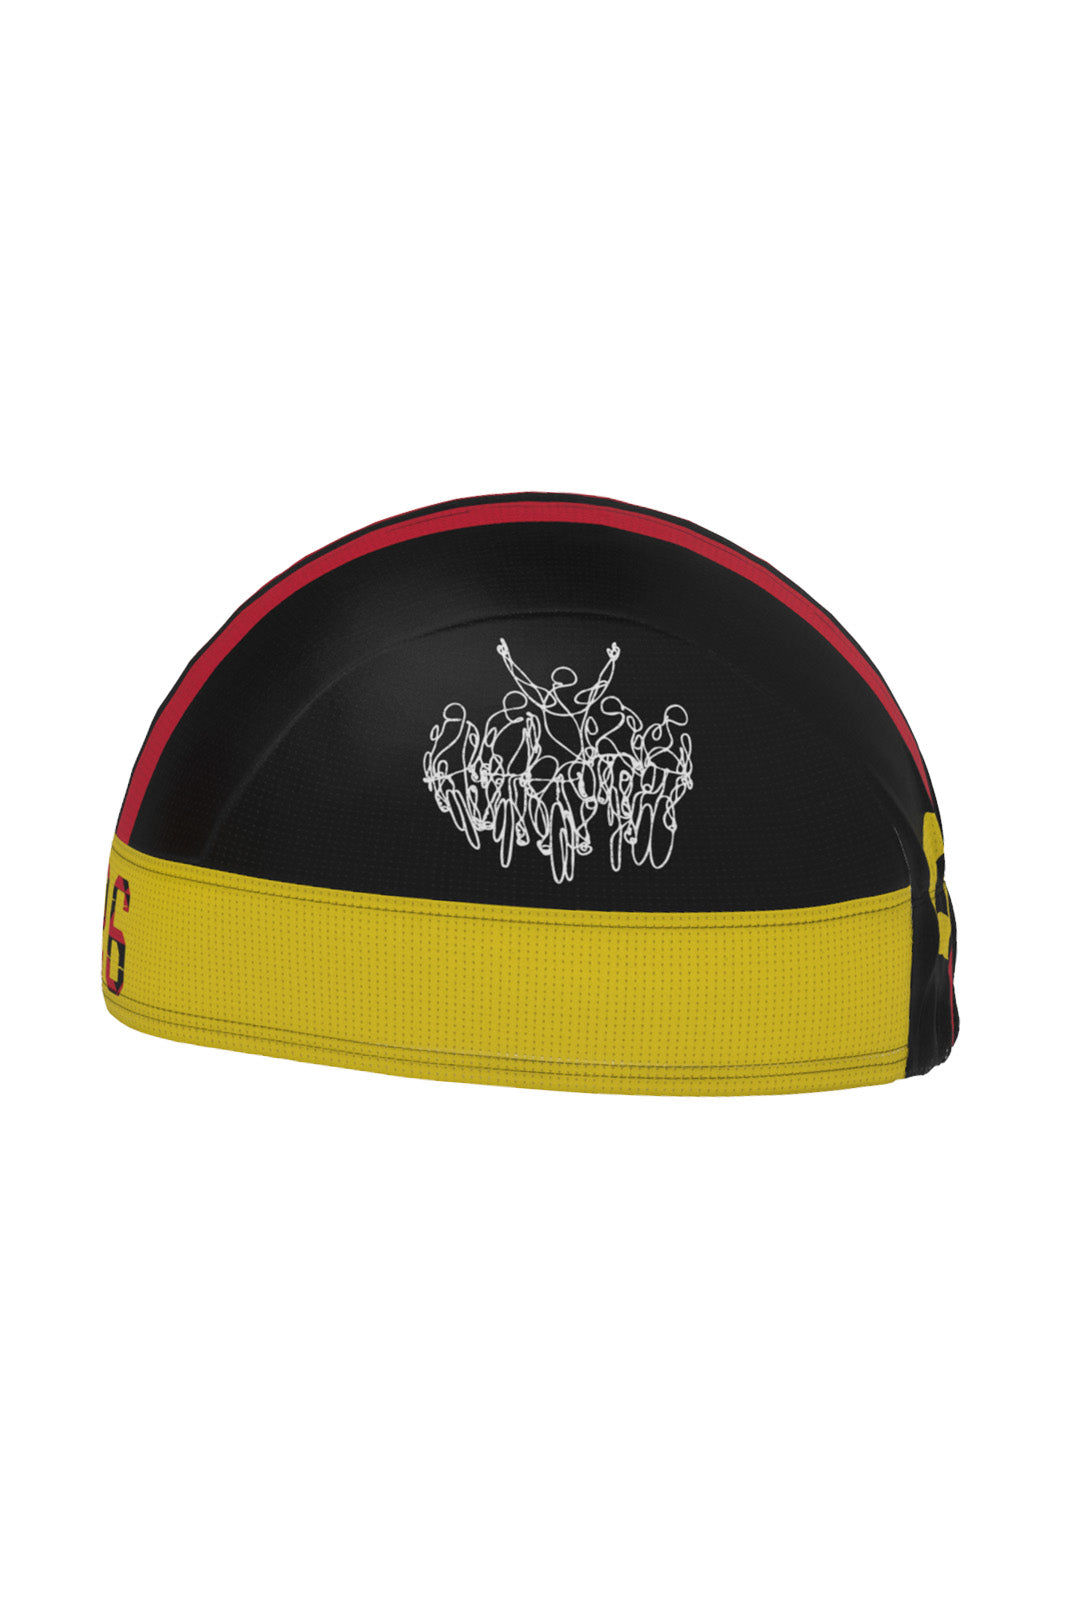 Summer Cycling Skull Cap - Power, Pride, Legacy side view